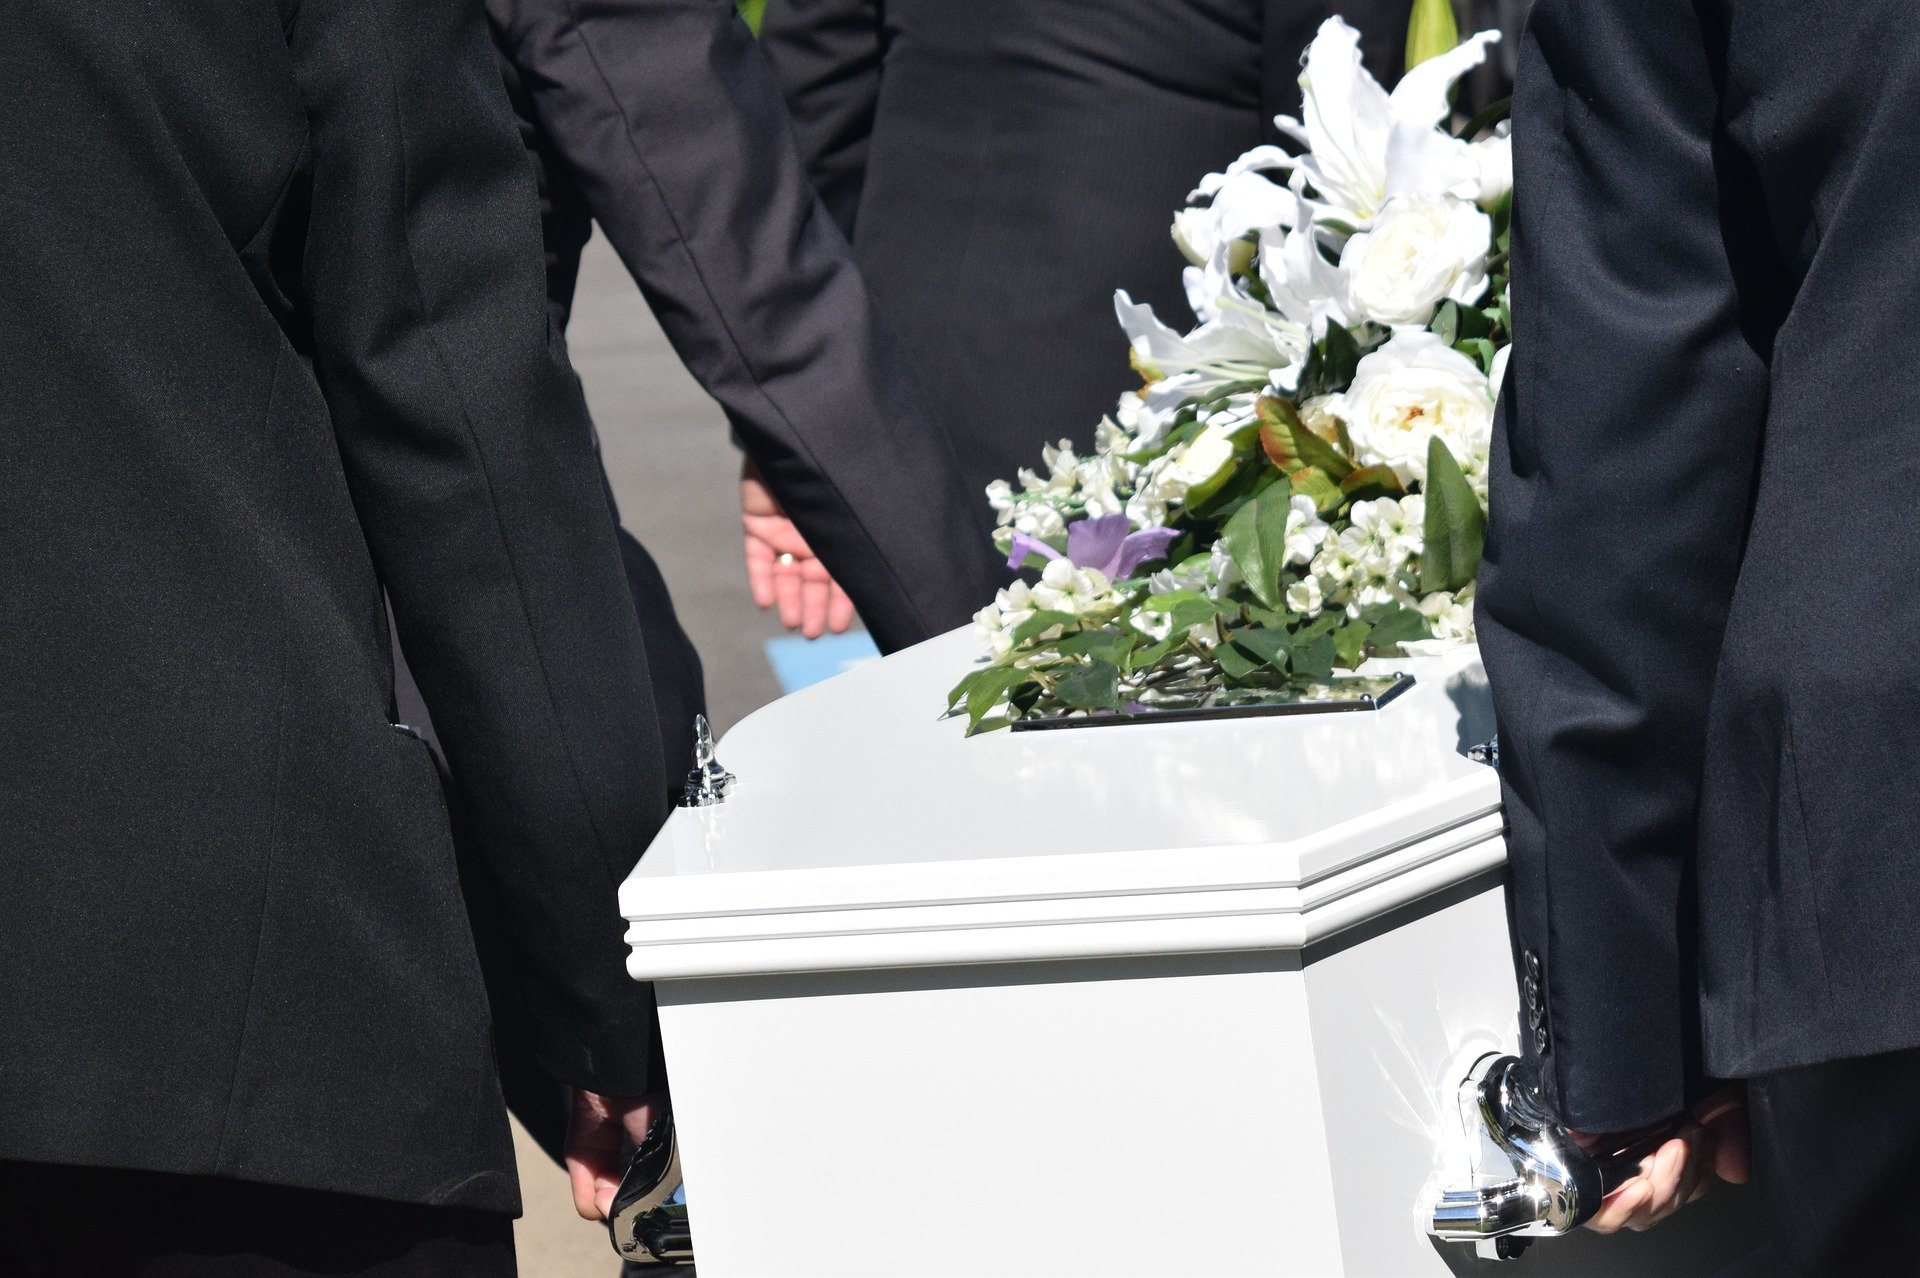 Pallbearers carrying a casket at a funeral. | Source: carolynabooth/Pixabay 